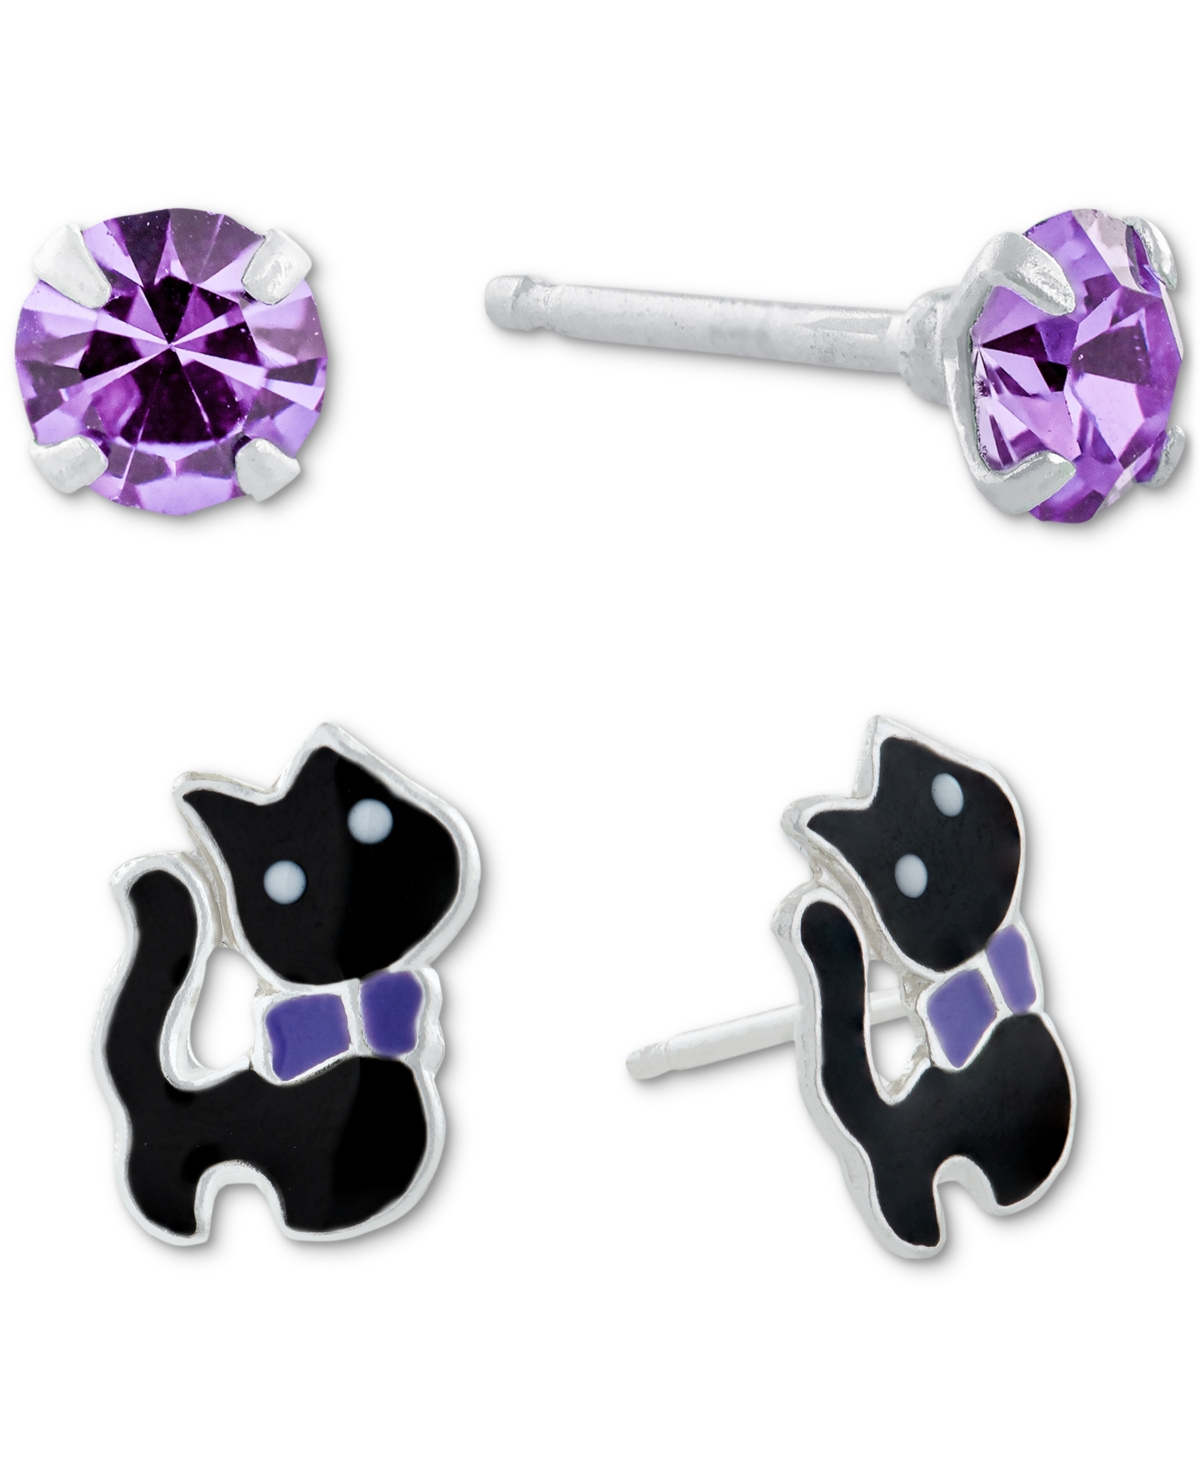 2-Pc. Set Crystal Solitaire & Enamel Cat Stud Earrings in Sterling Silver, Created for Macy's - Black/white